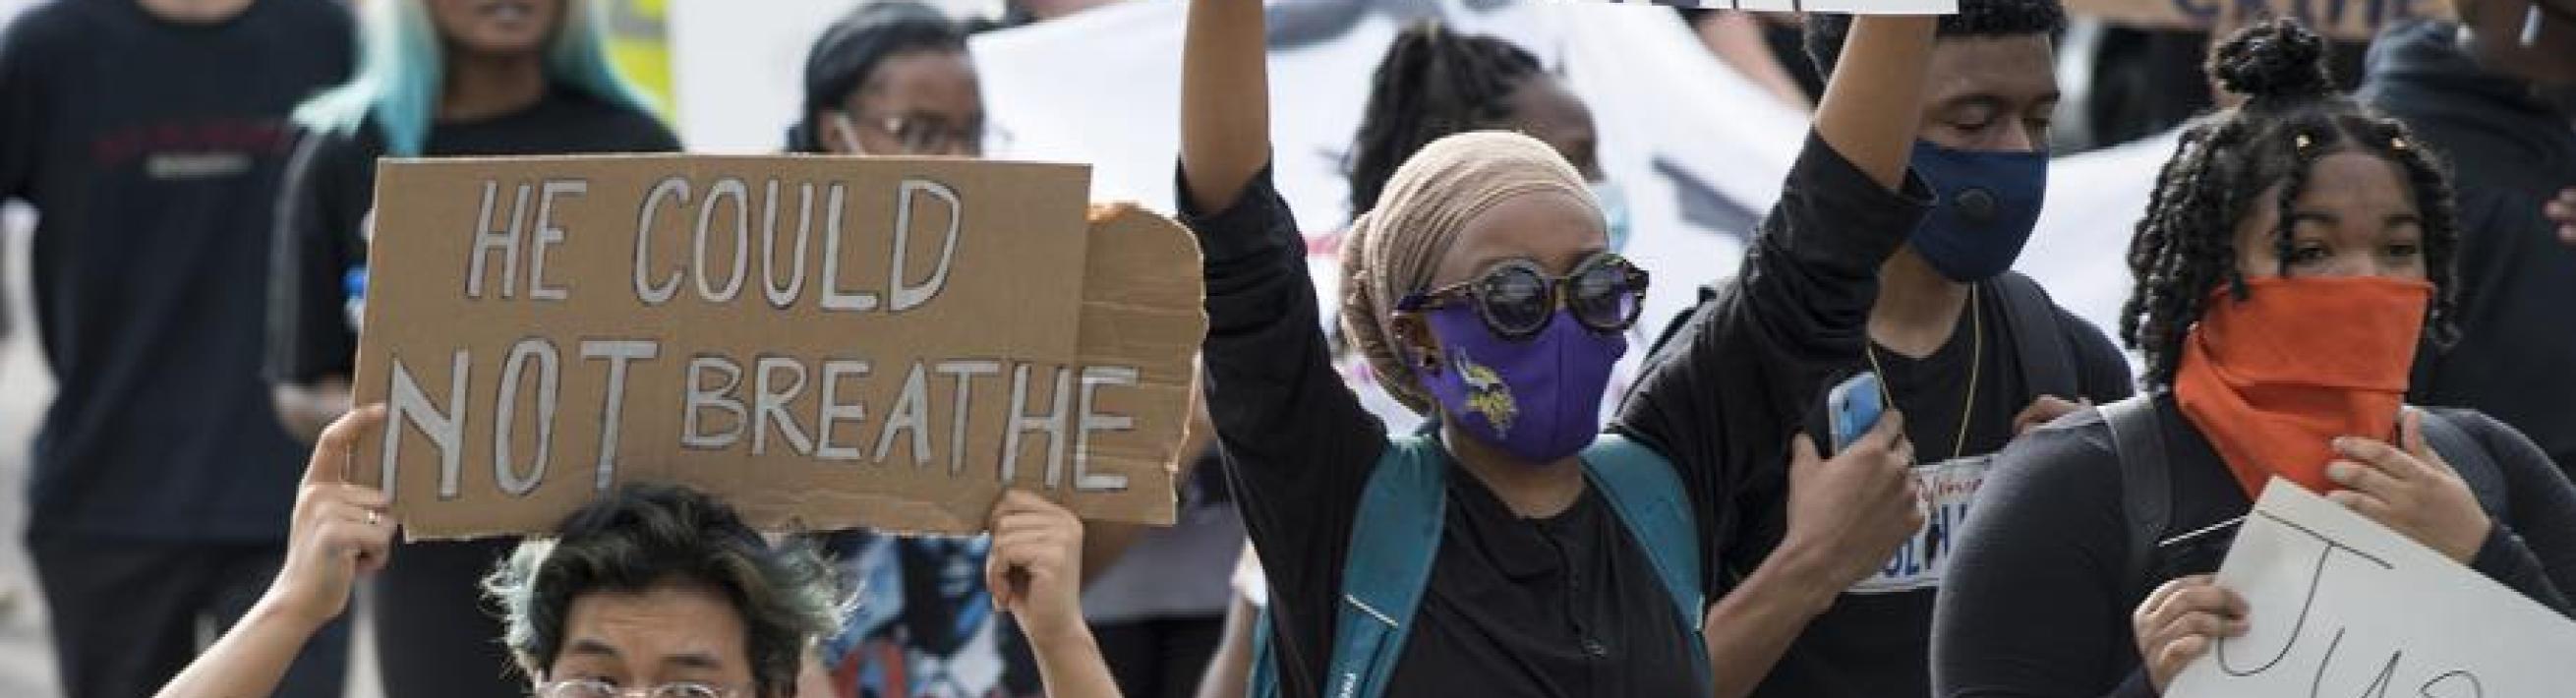 People march during a protest opposing police violence